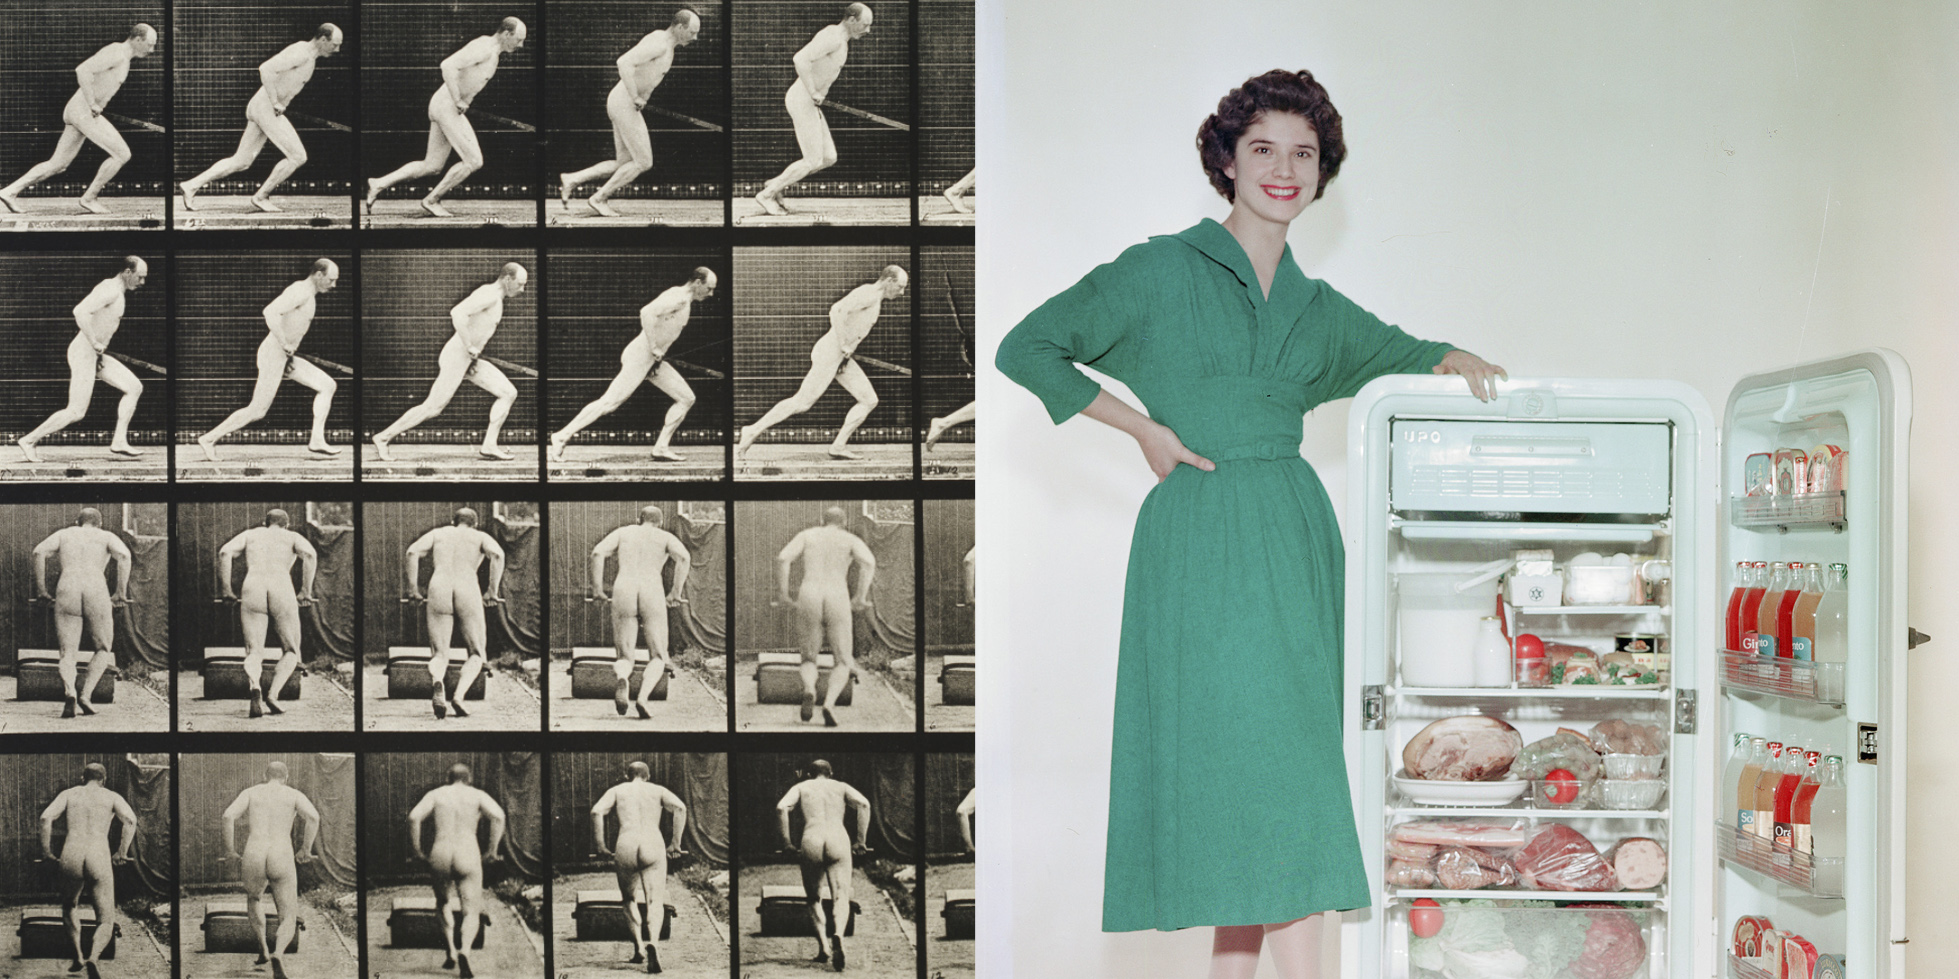 Two images: serial capture of a half nude man moving and an fridge advertisement with a lady in green dress.